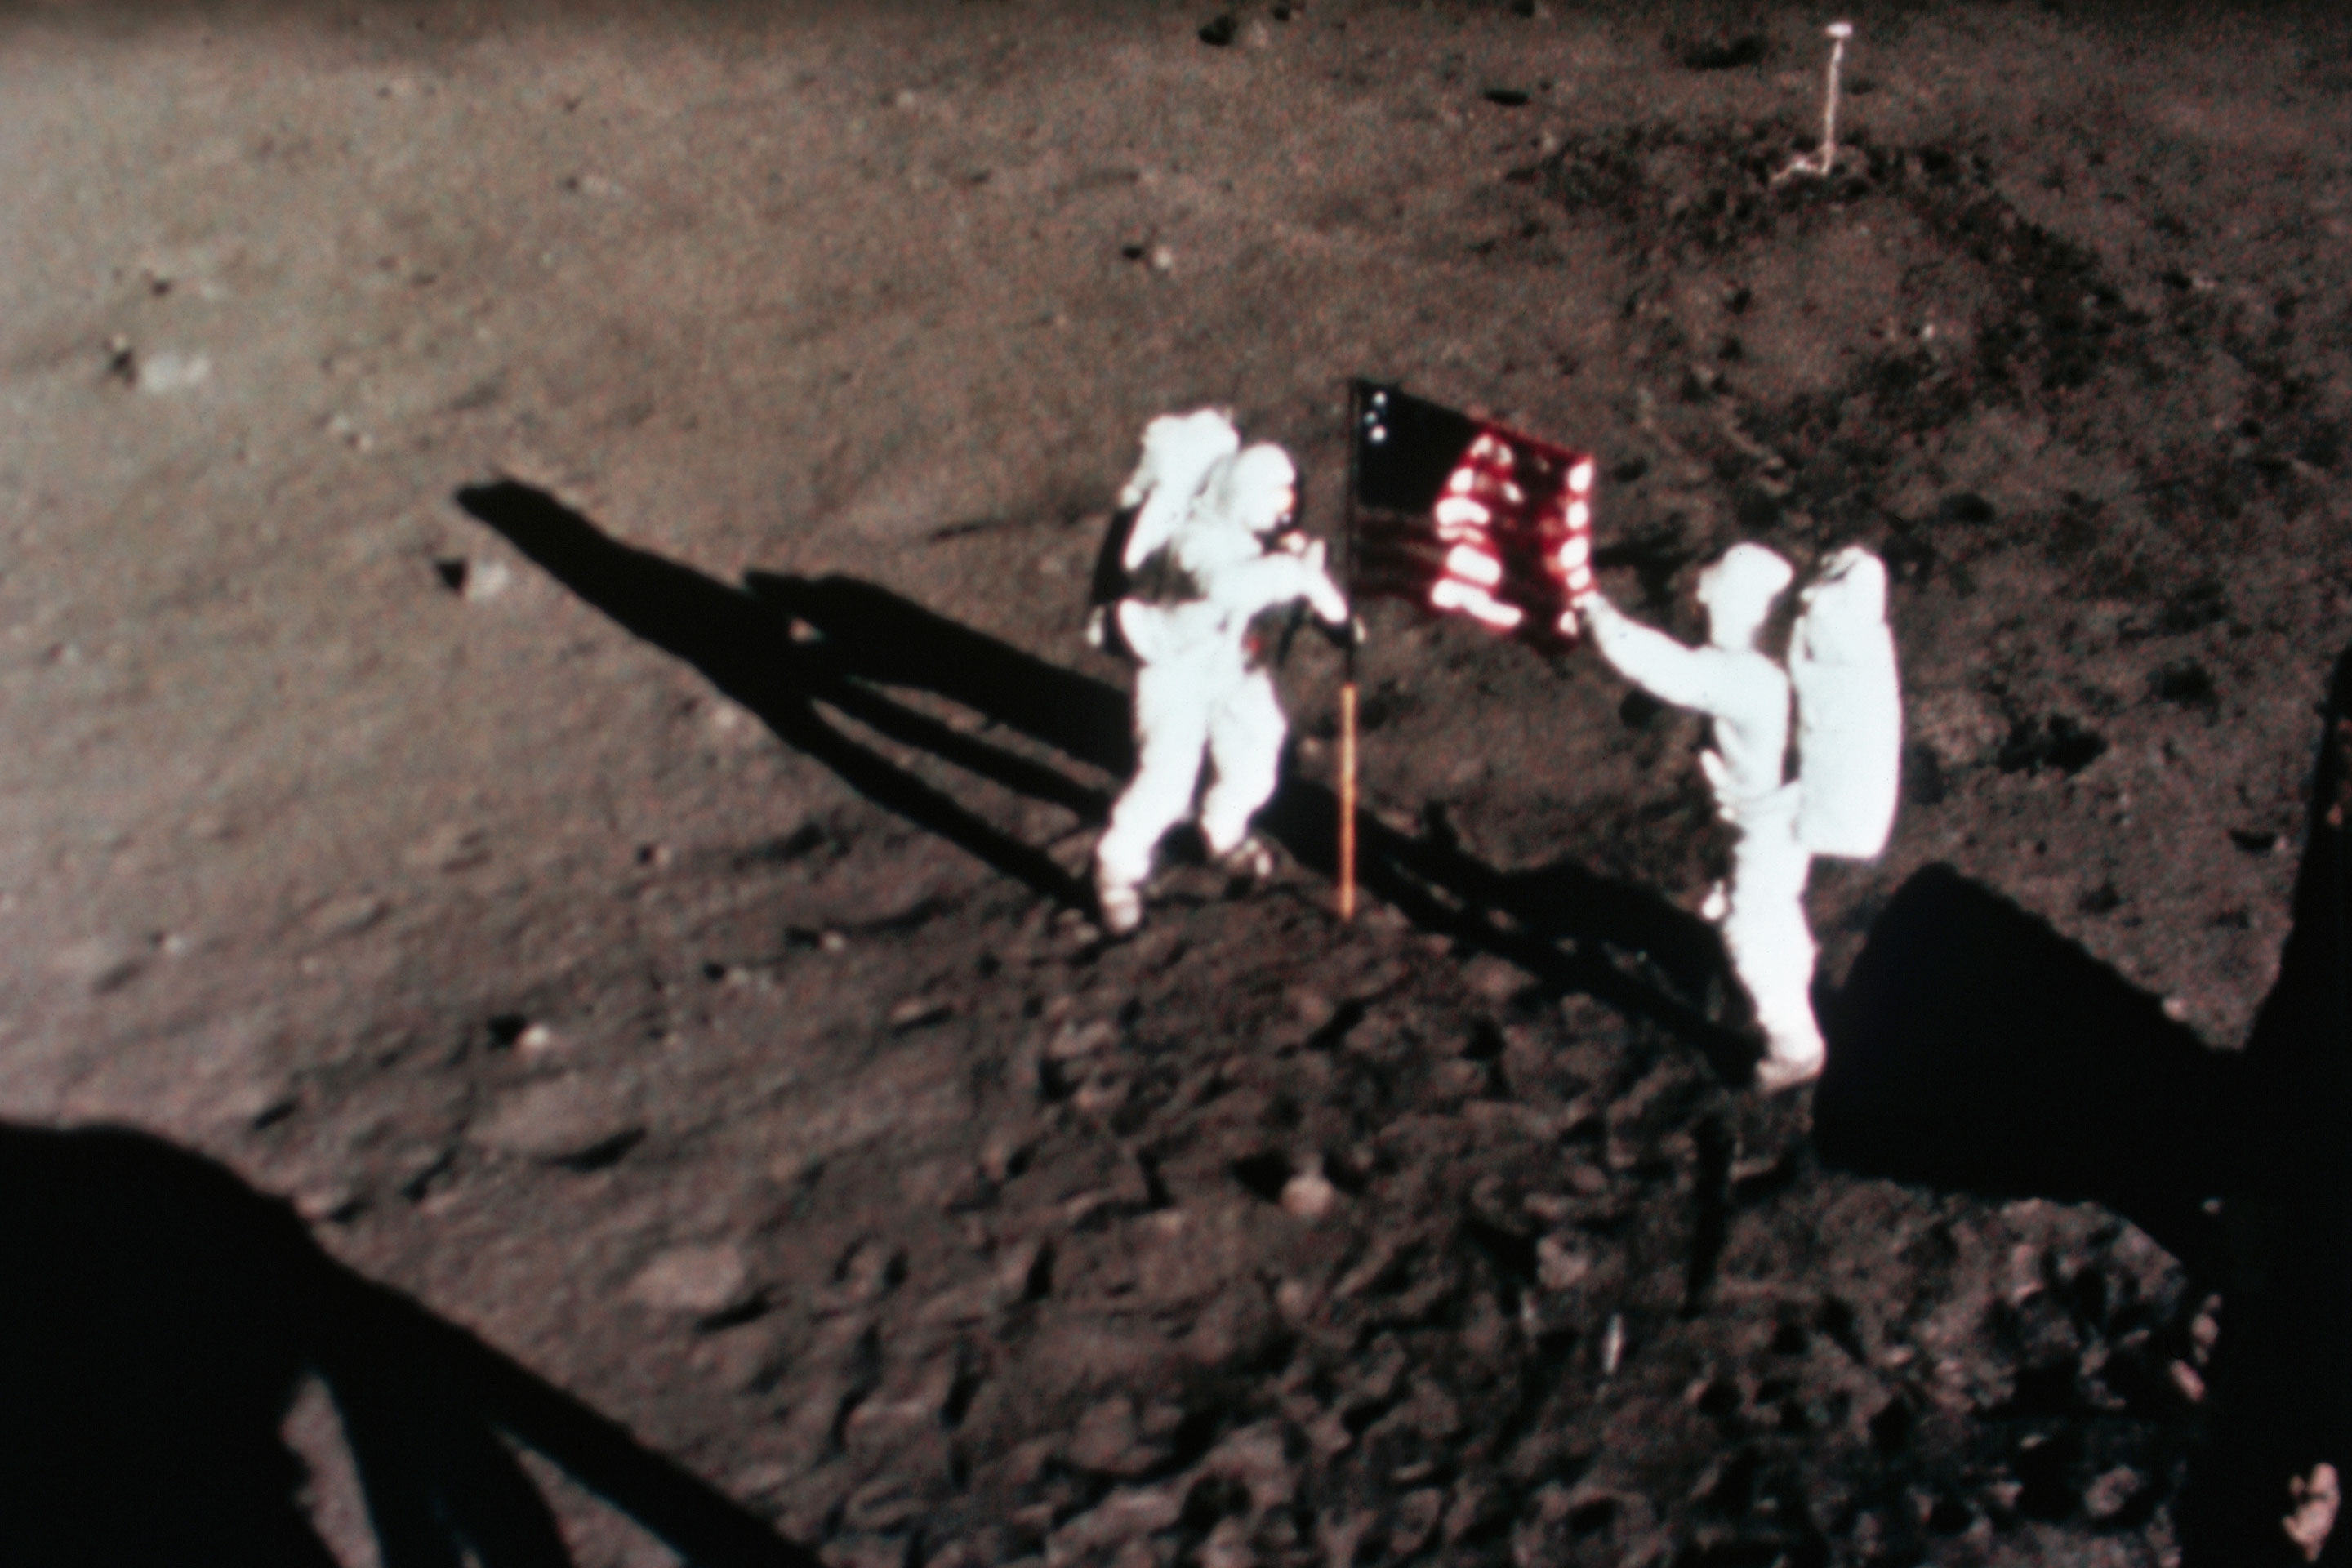 The Apollo Moon Landing Cost the Equivalent of $600 Billion. Here's Why That Was a Bargain